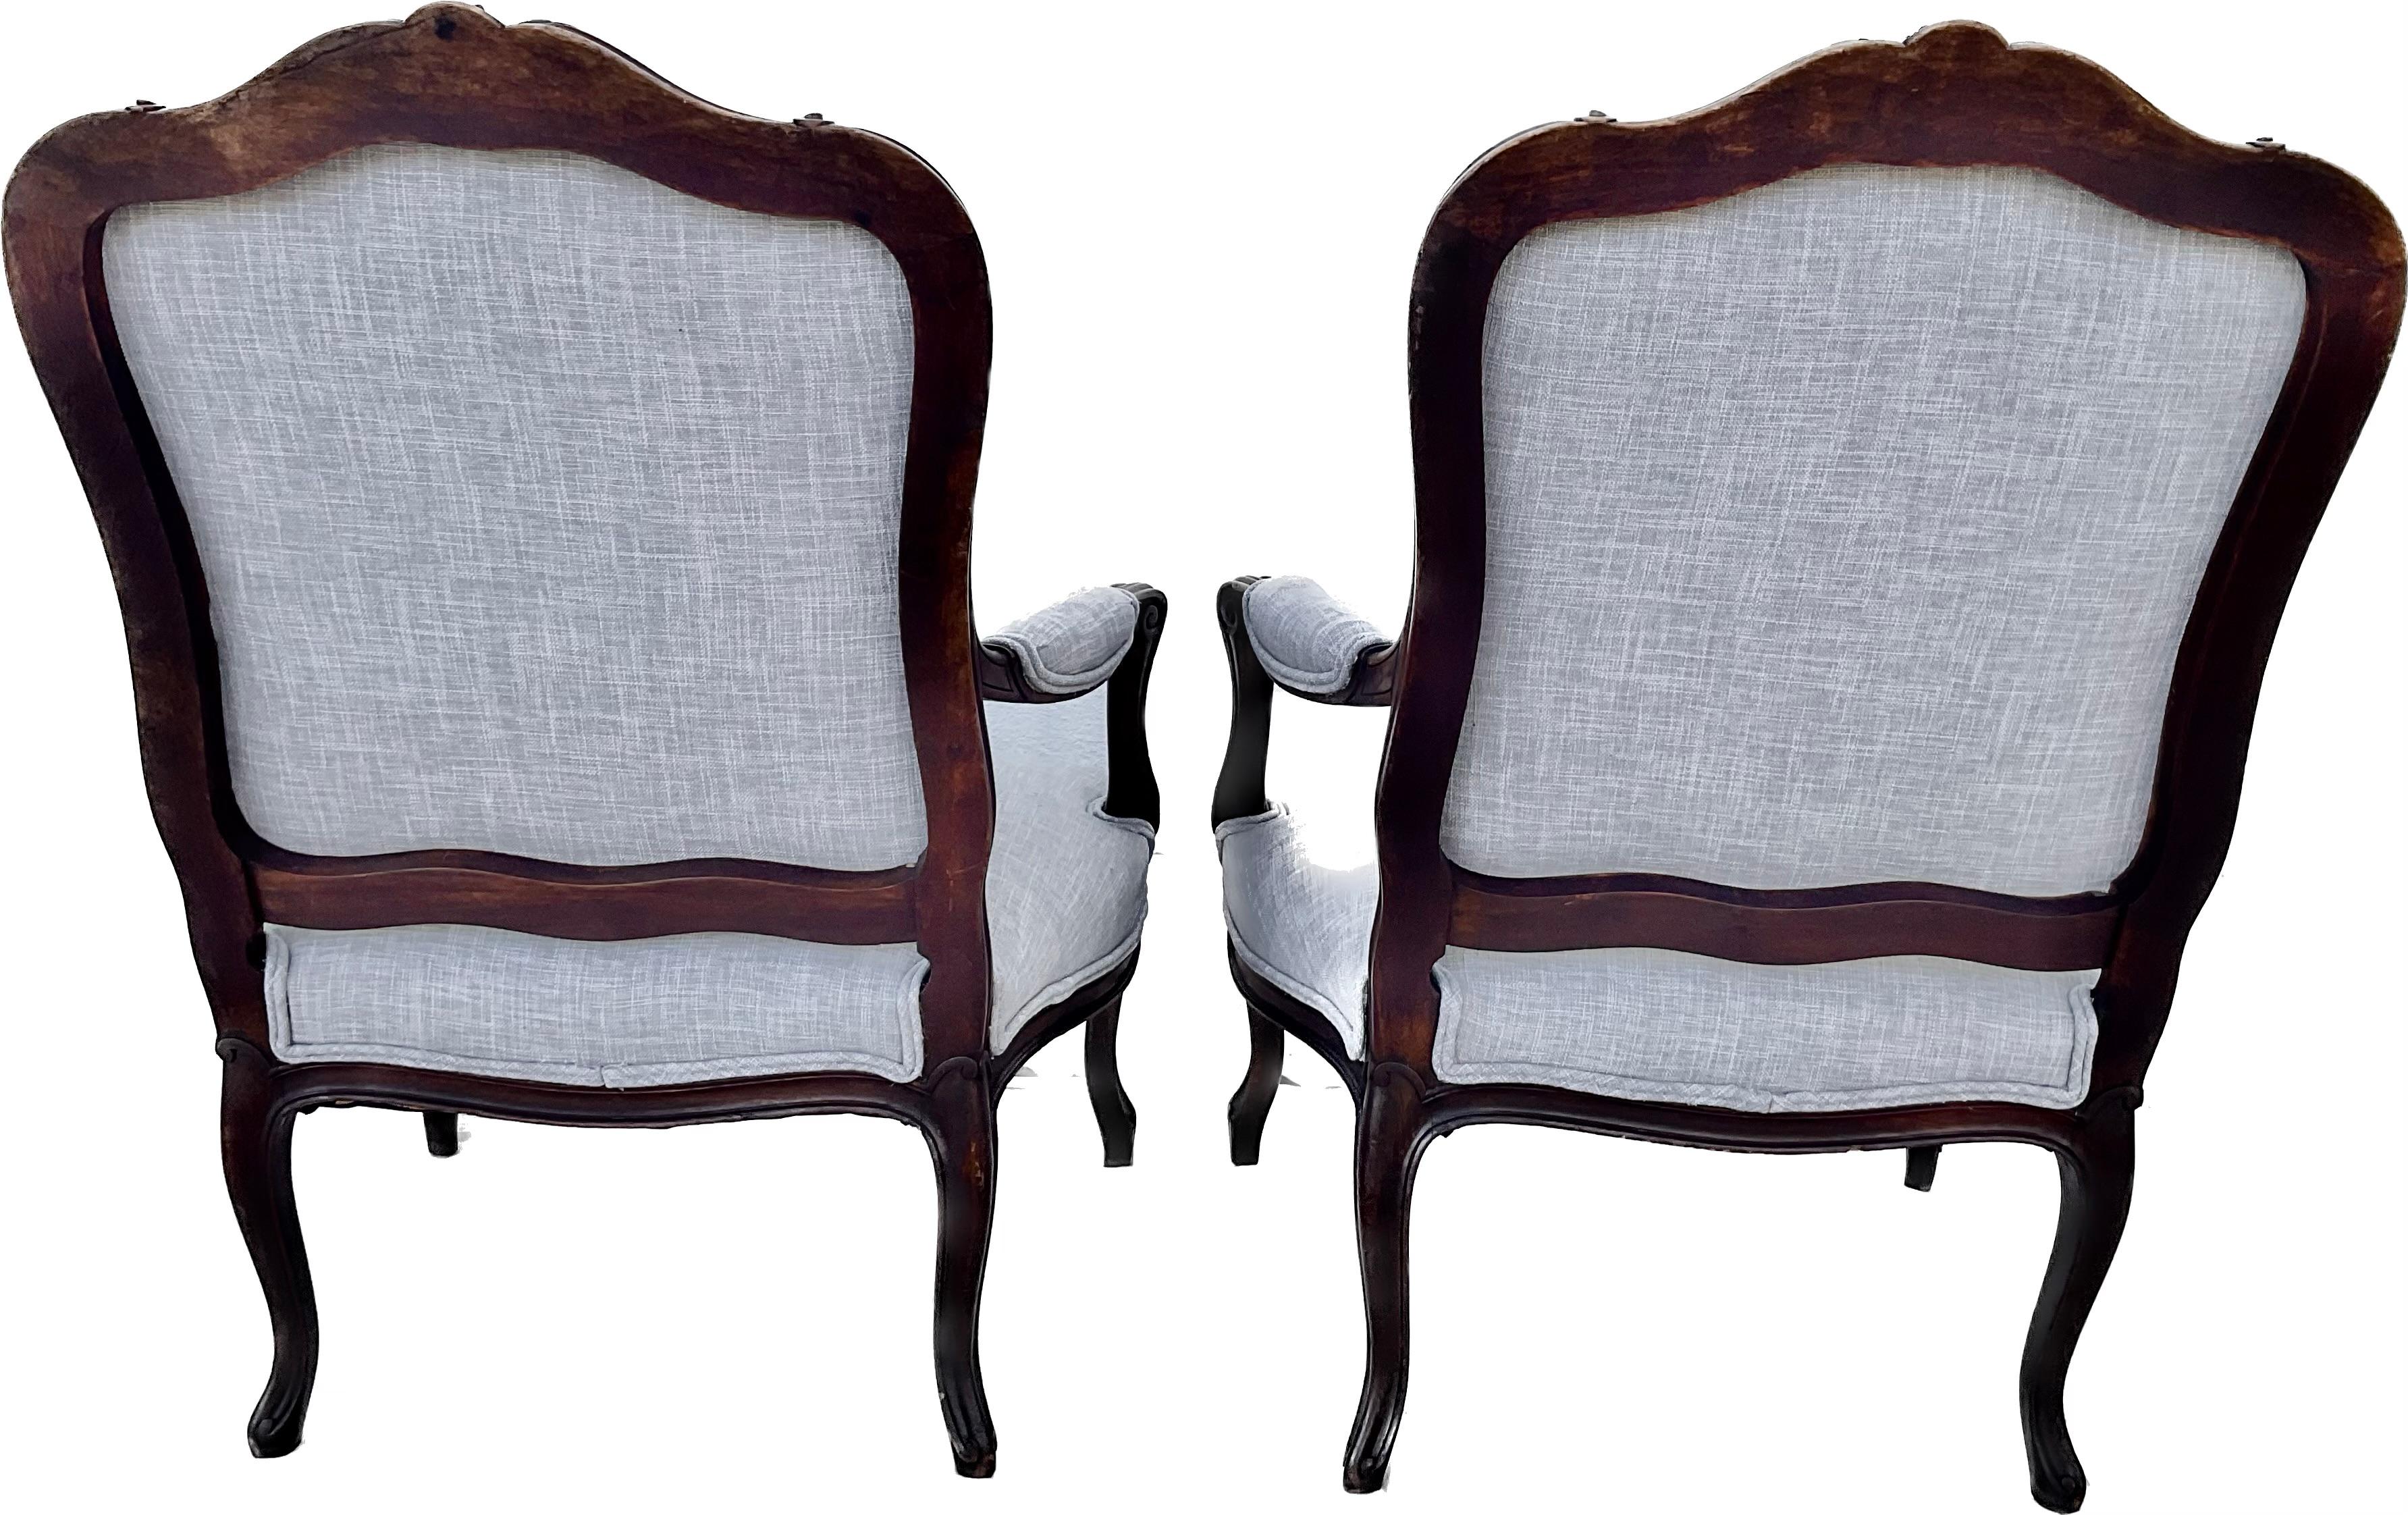 Pair of 19th Century French Louis XV Carved Wood And Upholstered Arm Chairs In Good Condition For Sale In Bradenton, FL